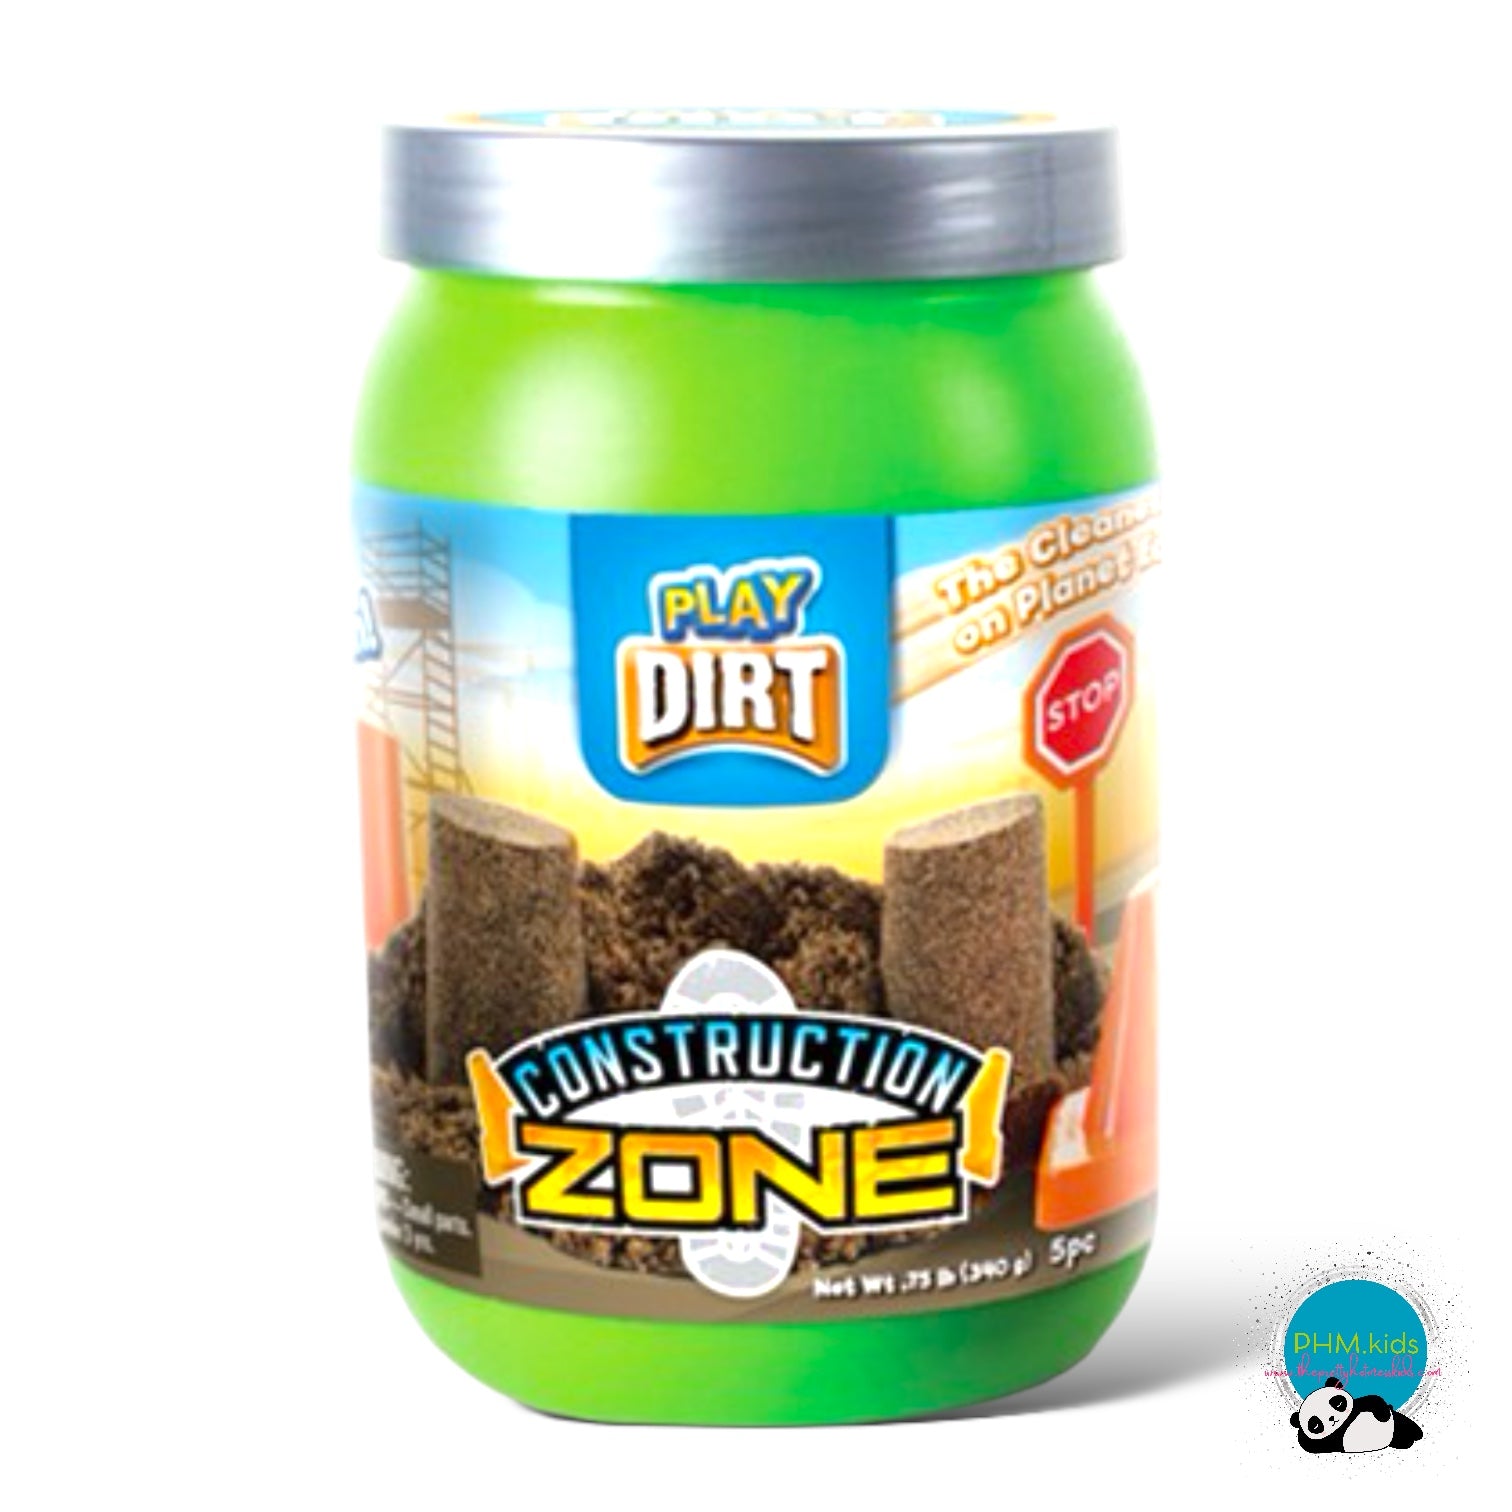 Play Dirt Construction Zone